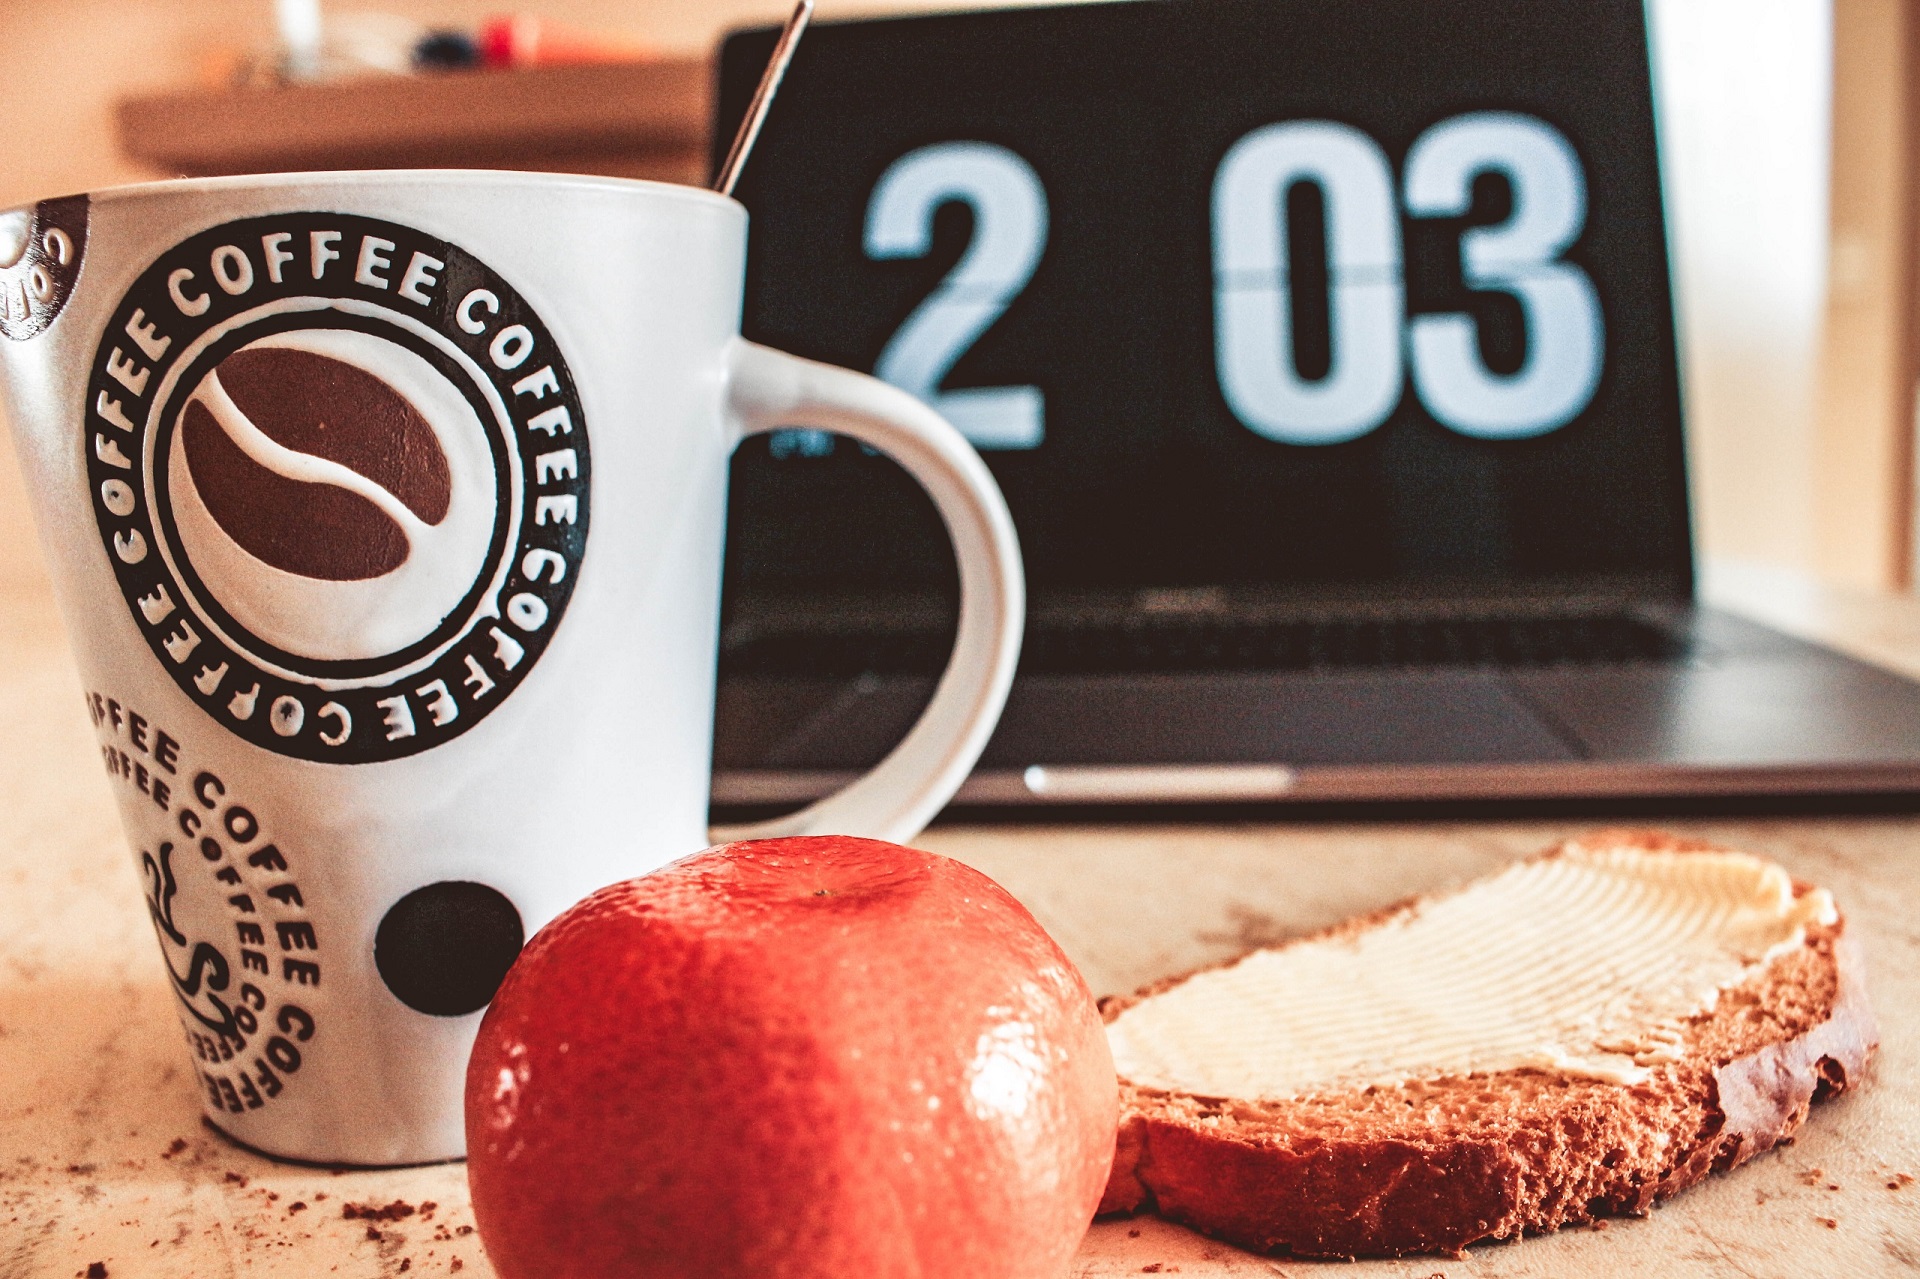 toast, fruit, coffee, and a clock